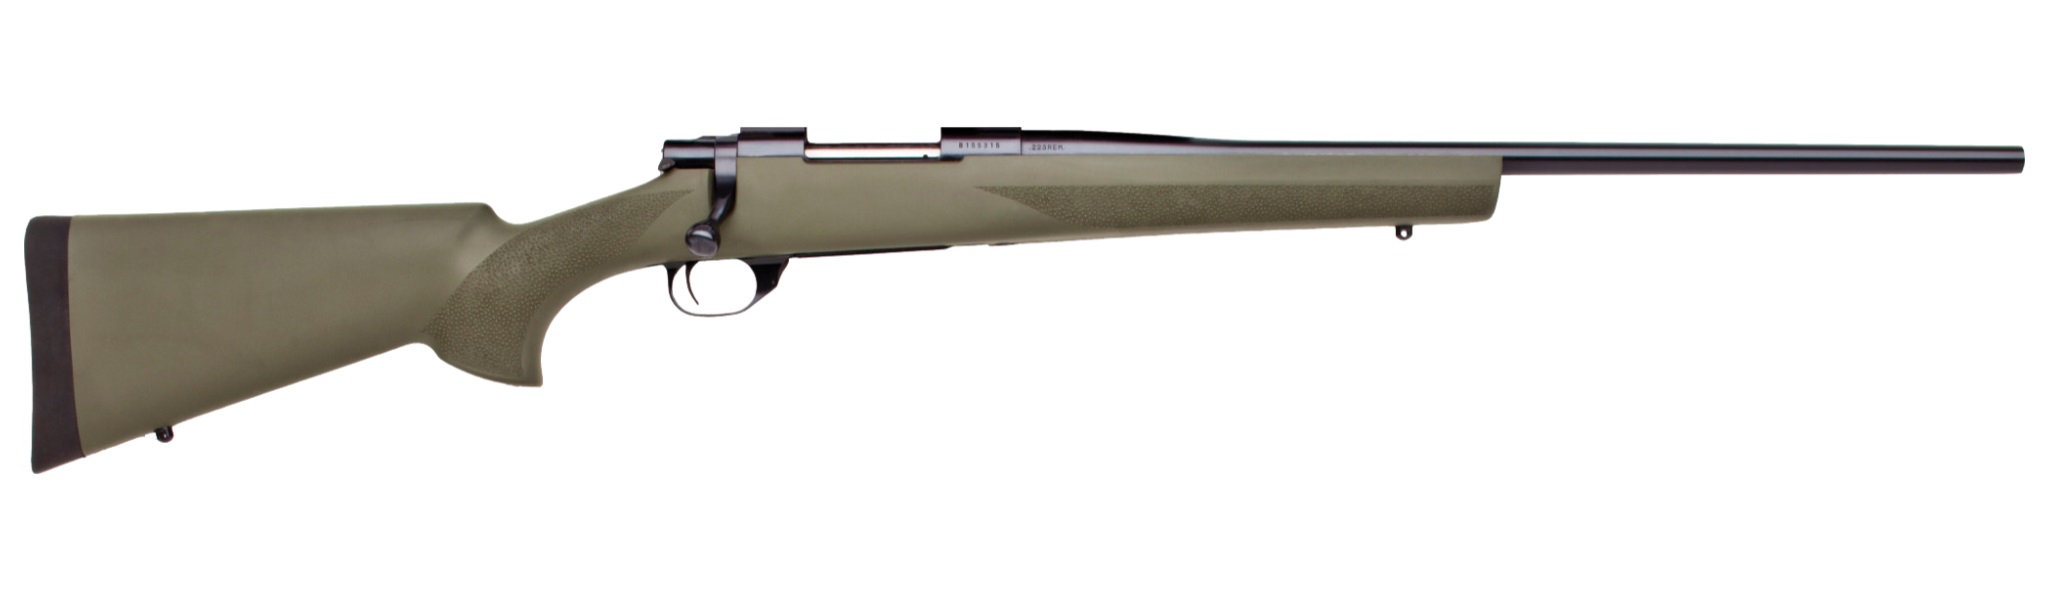 A bolt-action rifle chambered in 22-250 Remington.